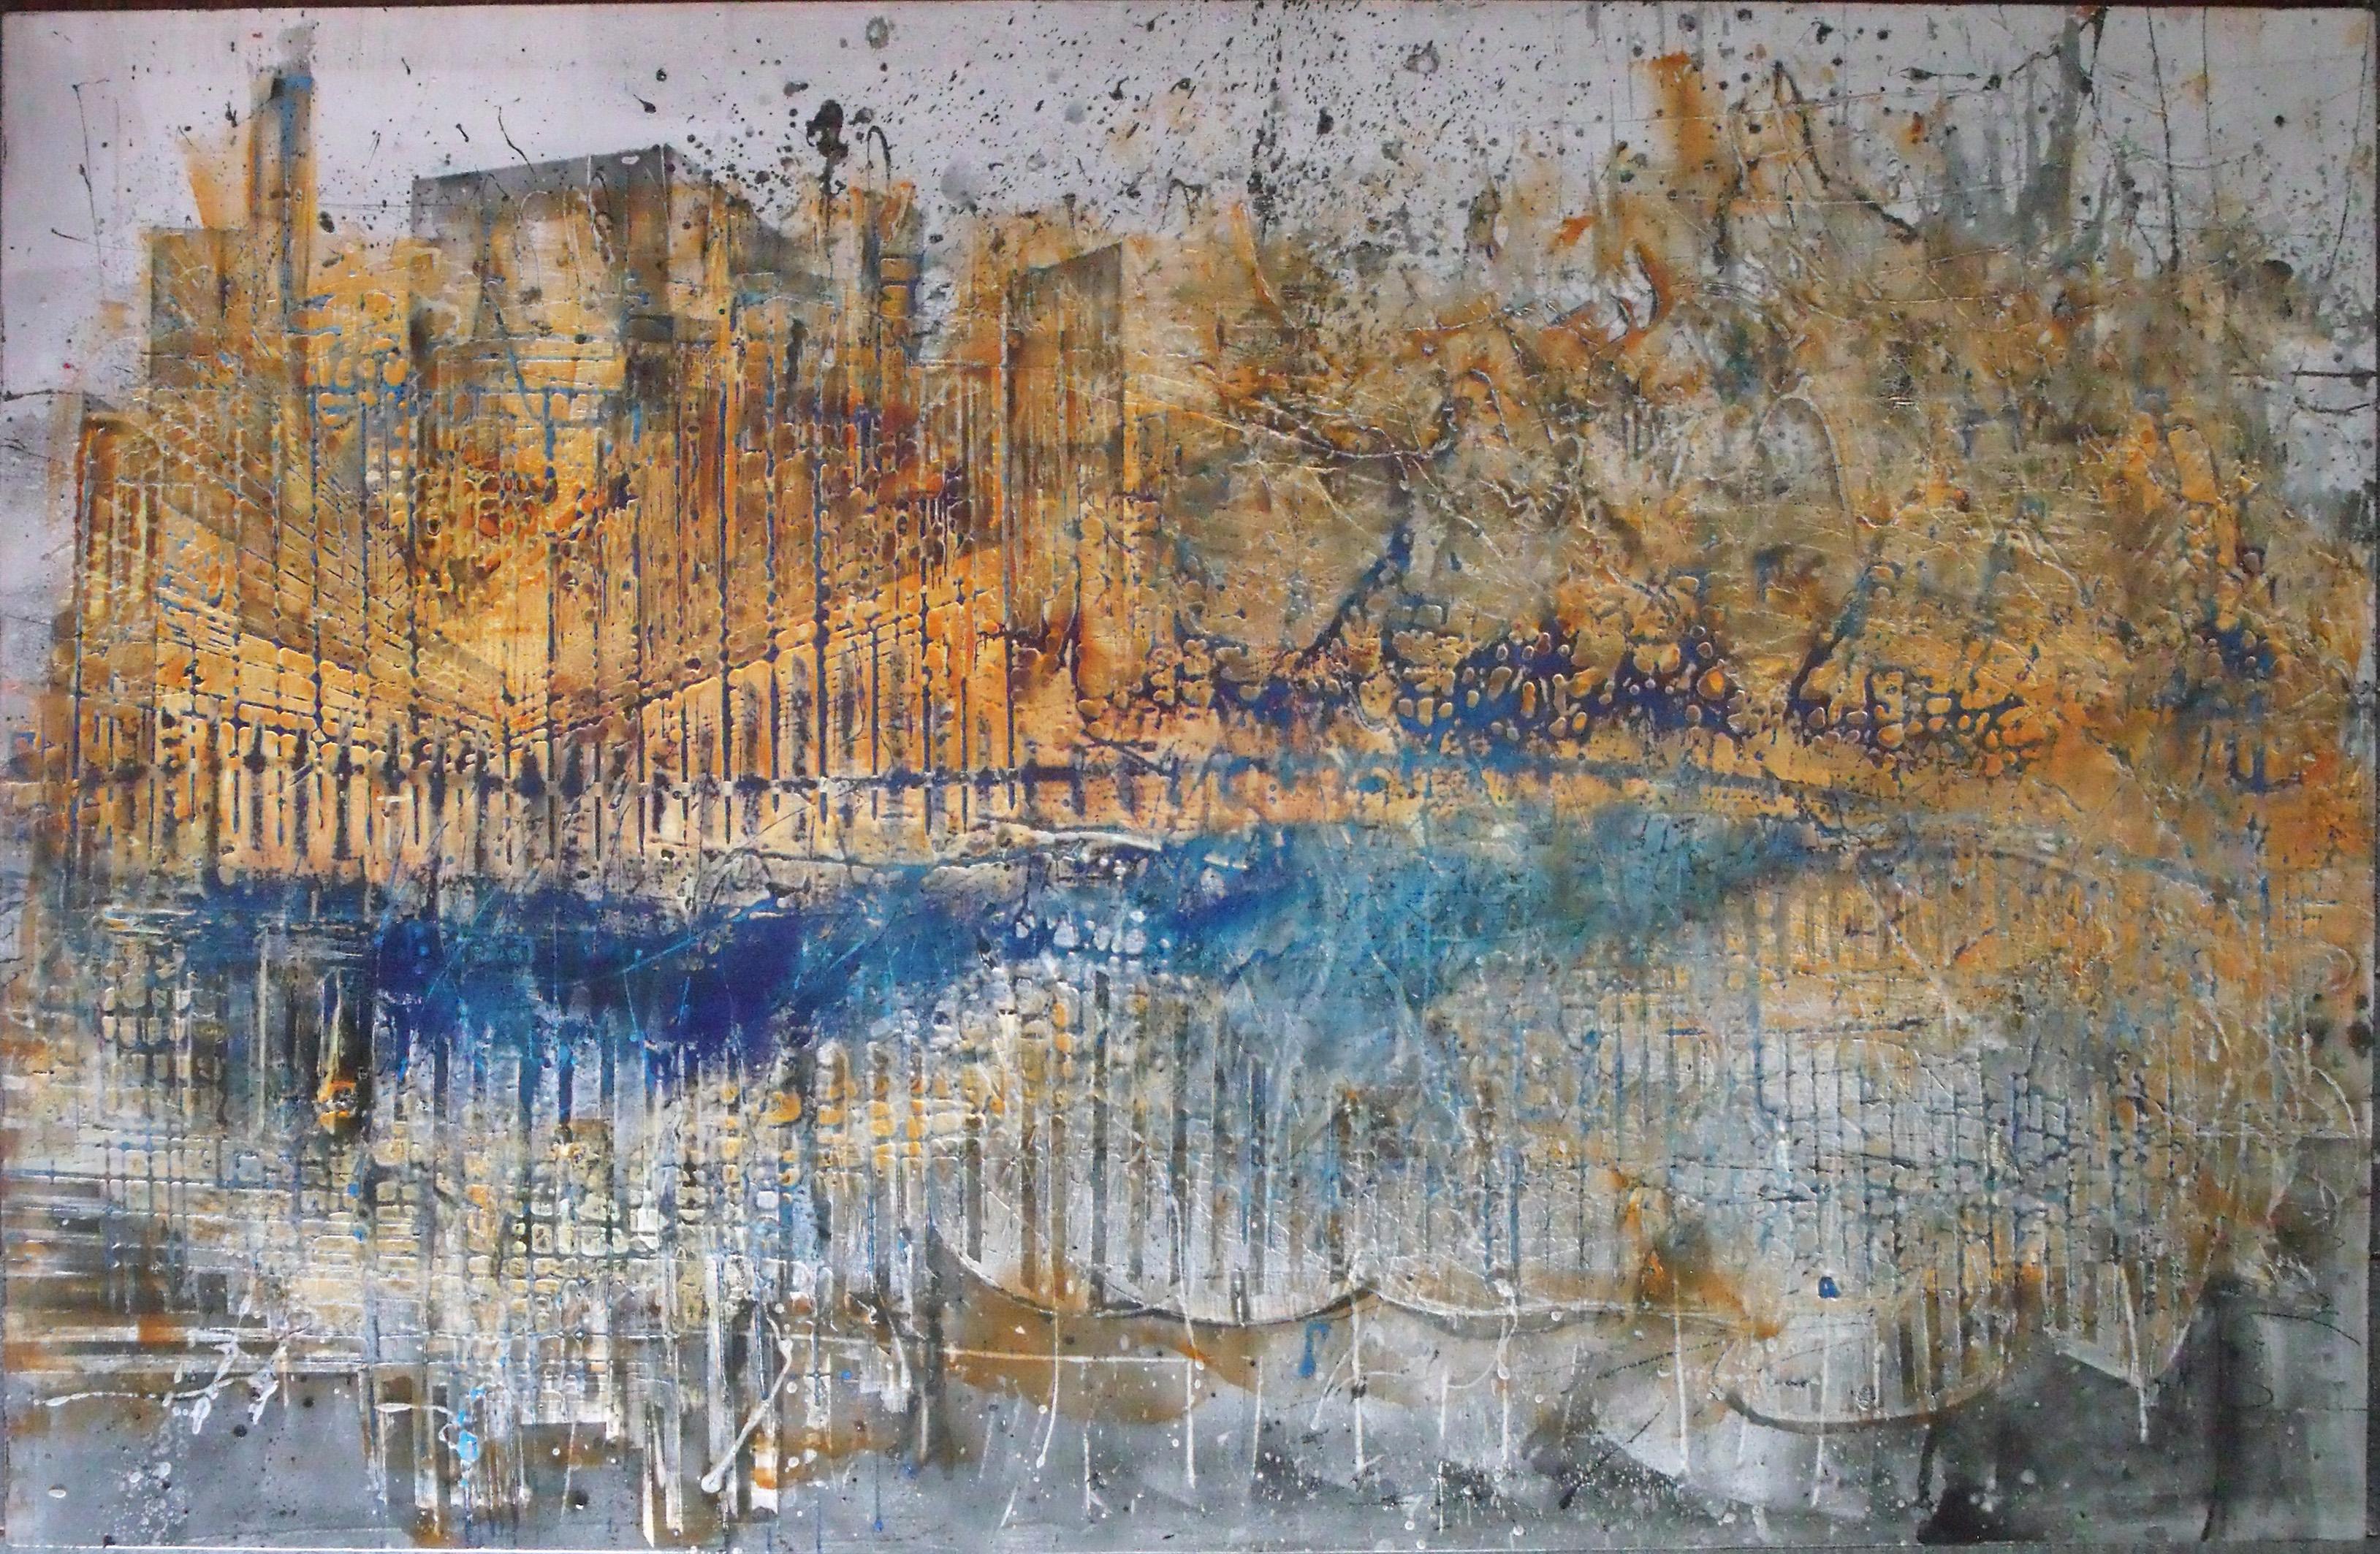 abstract "Sea of fire" spray varnish pigments on  wood 153x100cm